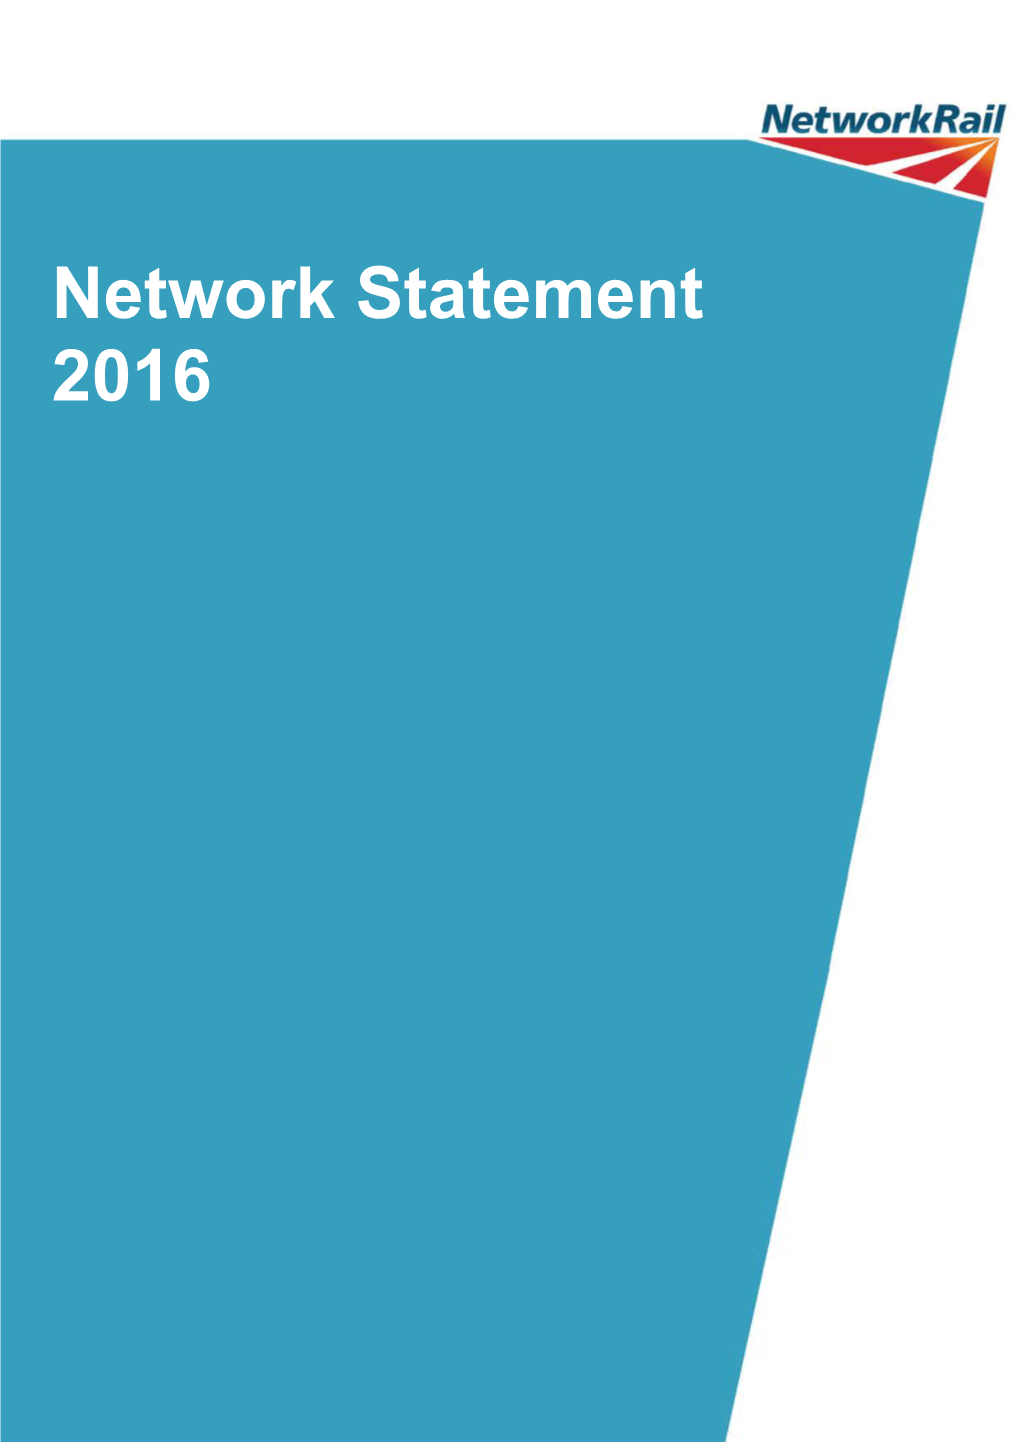 2016 Network Statement Is for Use for Capacity Requests for the 2016 Timetable Year (13 December 2015 to 10 Paul Harwood December 2016)